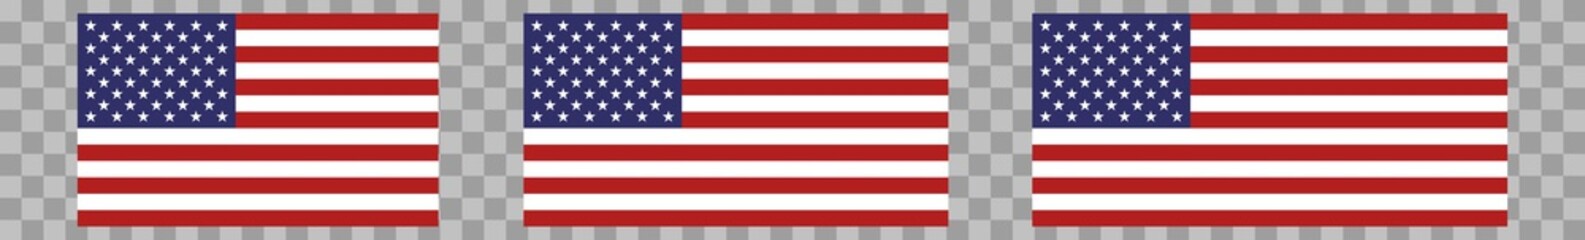 US Flag American | USA Flags | United States Country | America Symbol | Isolated | Variations